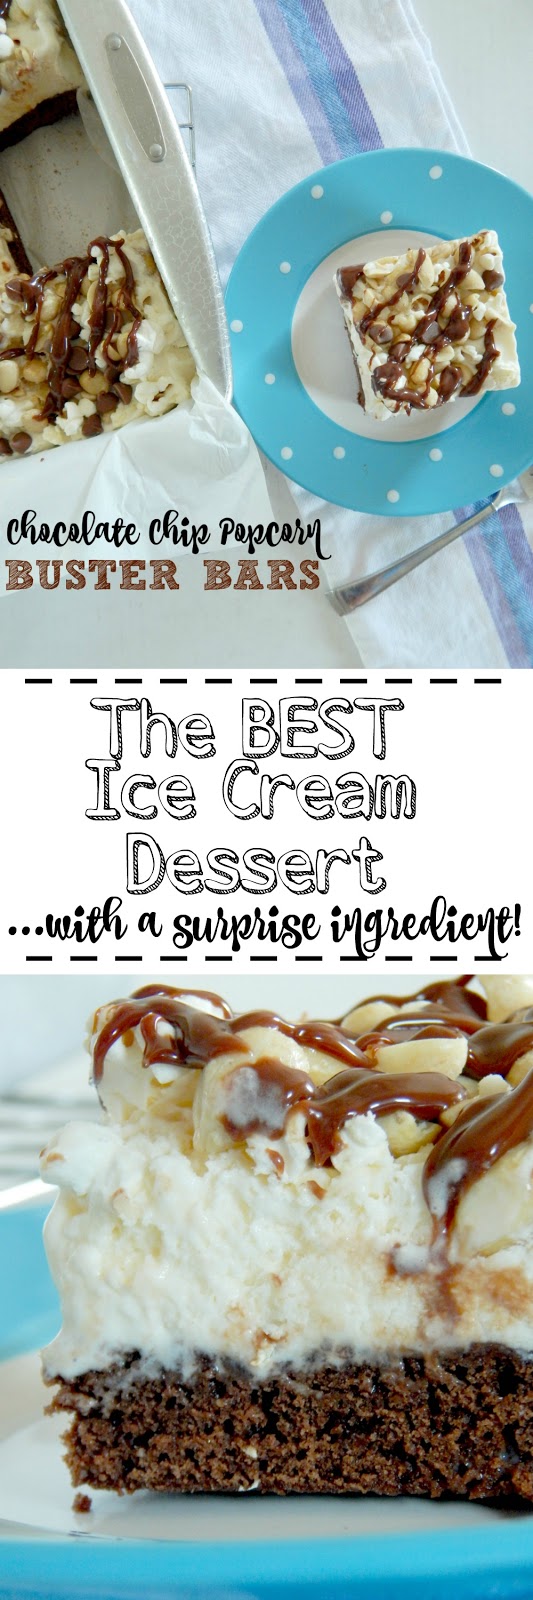 Chocolate Chip Popcorn Buster Bars...a frozen summer dessert you'll love!  A layer of brownies, ice cream, unique toppings and hot fudge! (sweetandsavoryfood.com)